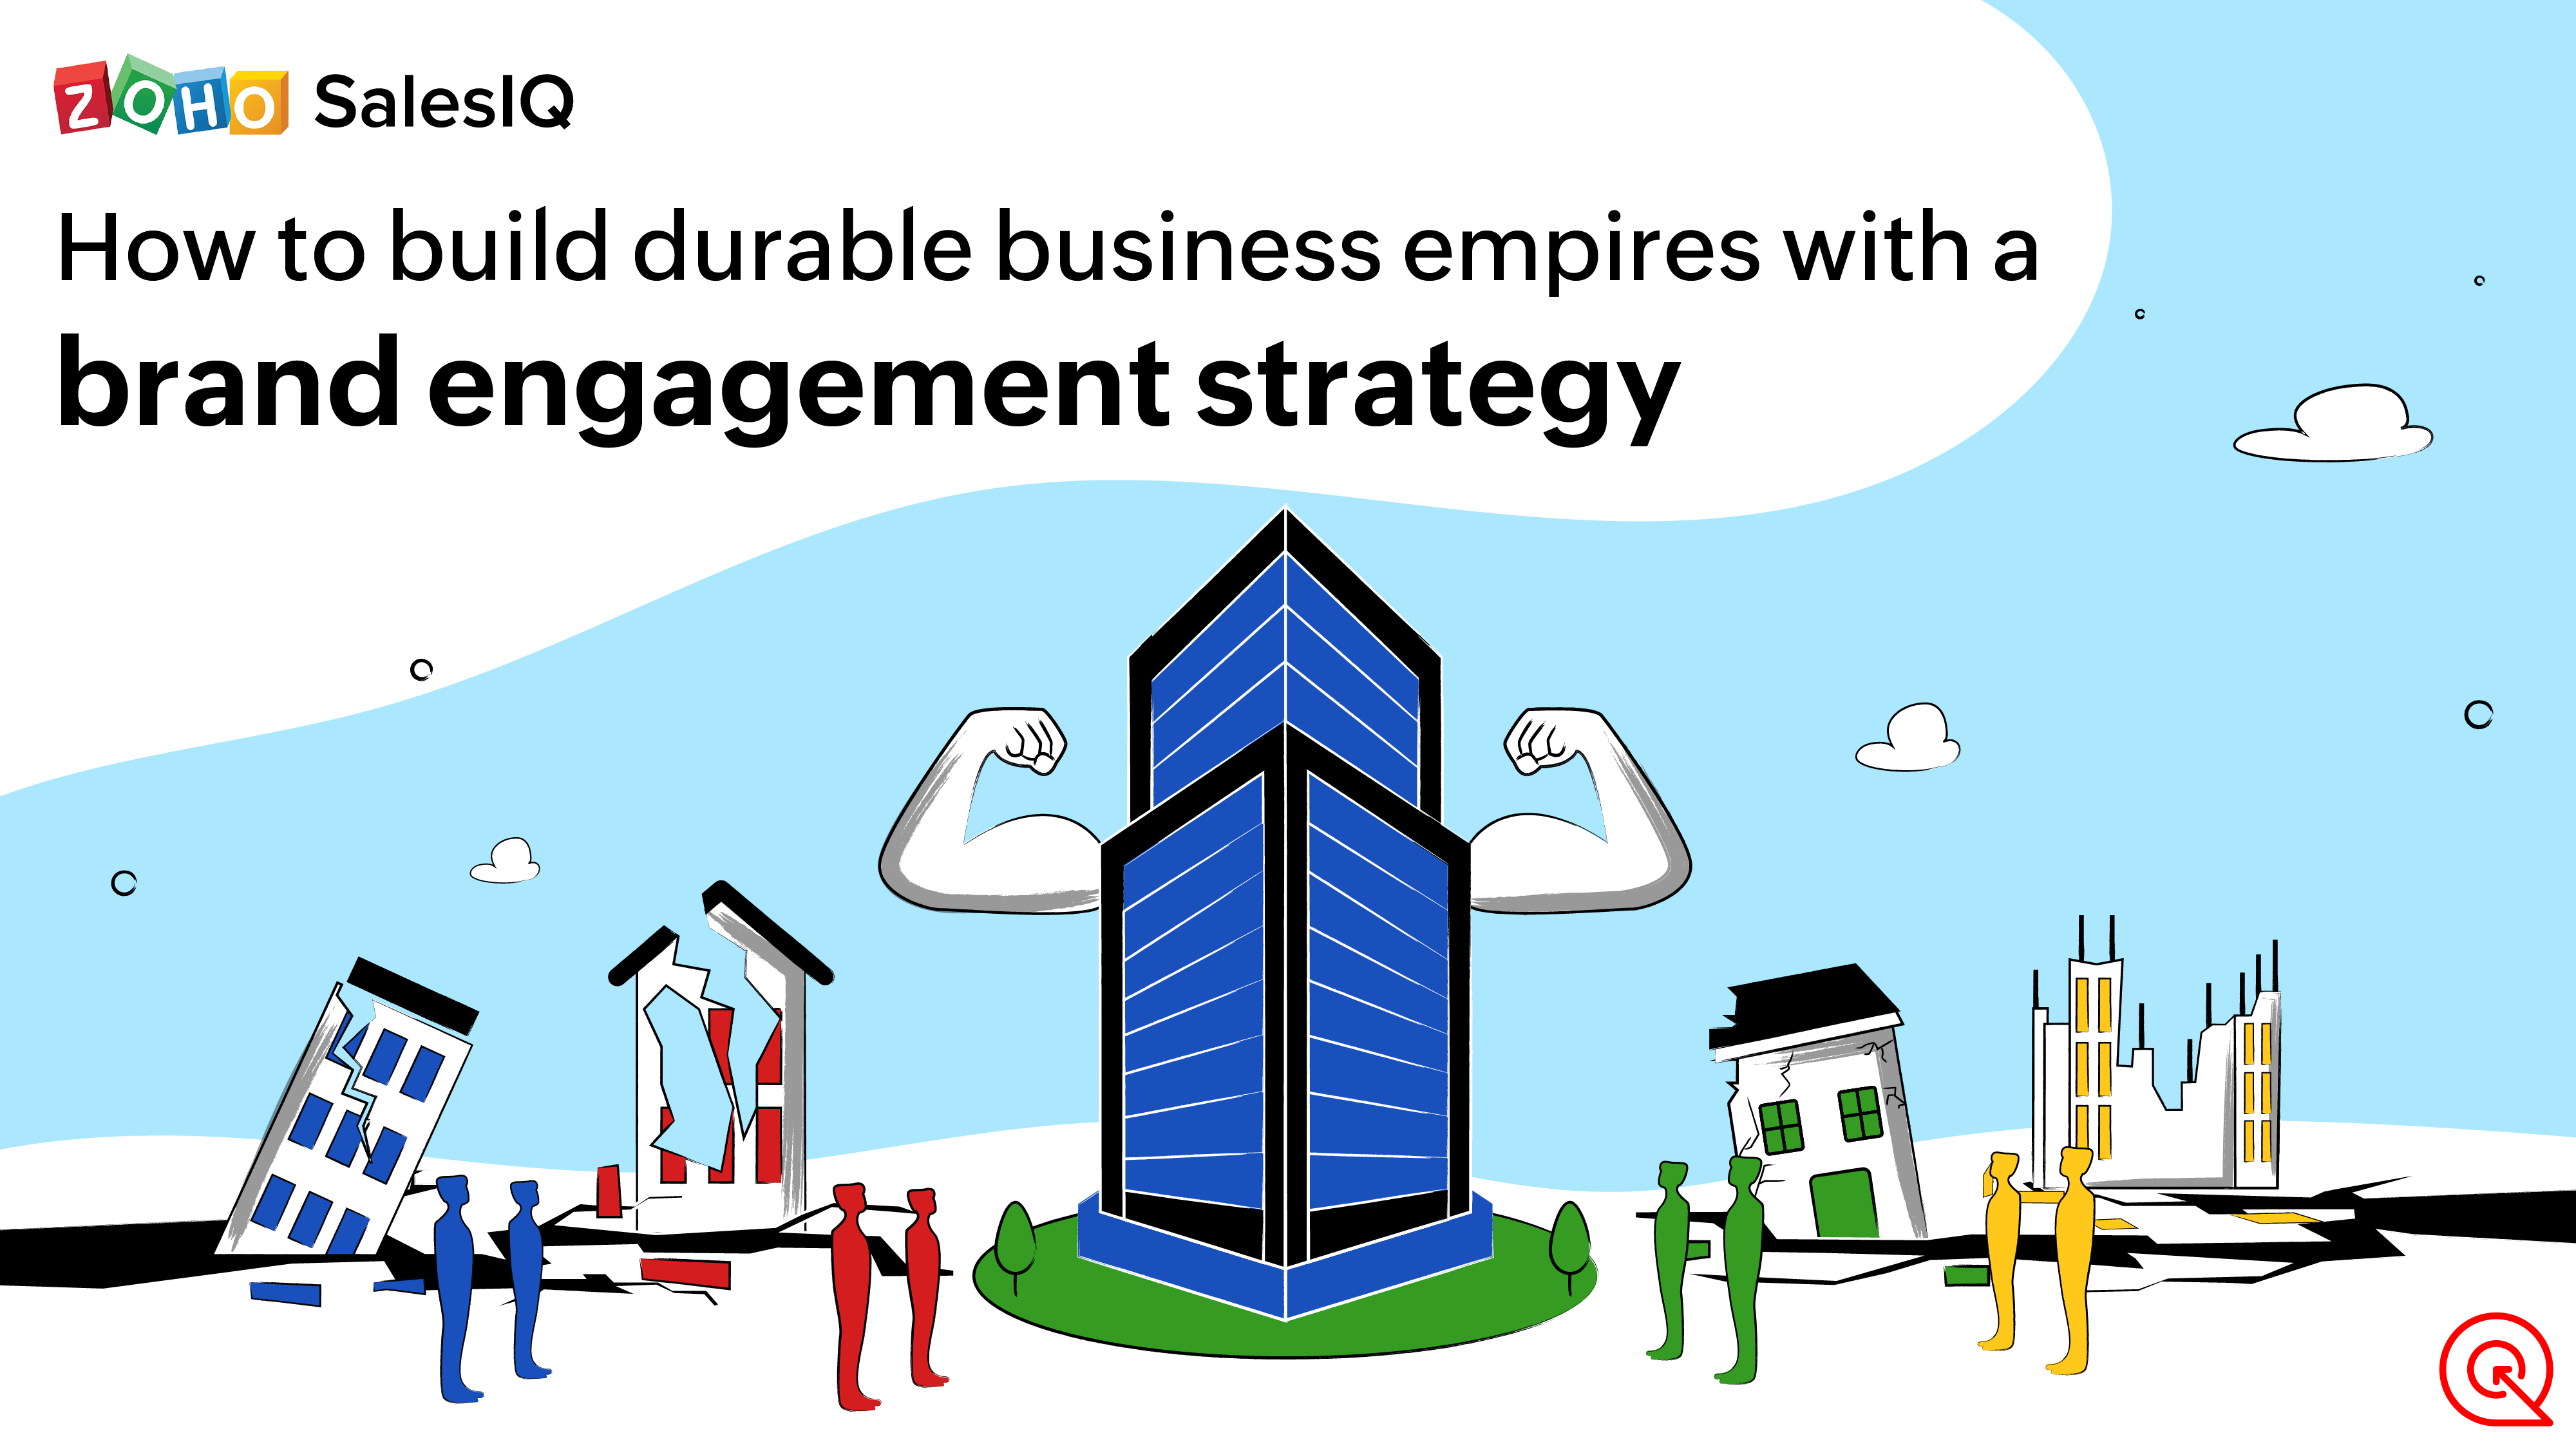 How to build durable business empires with a brand engagement strategy